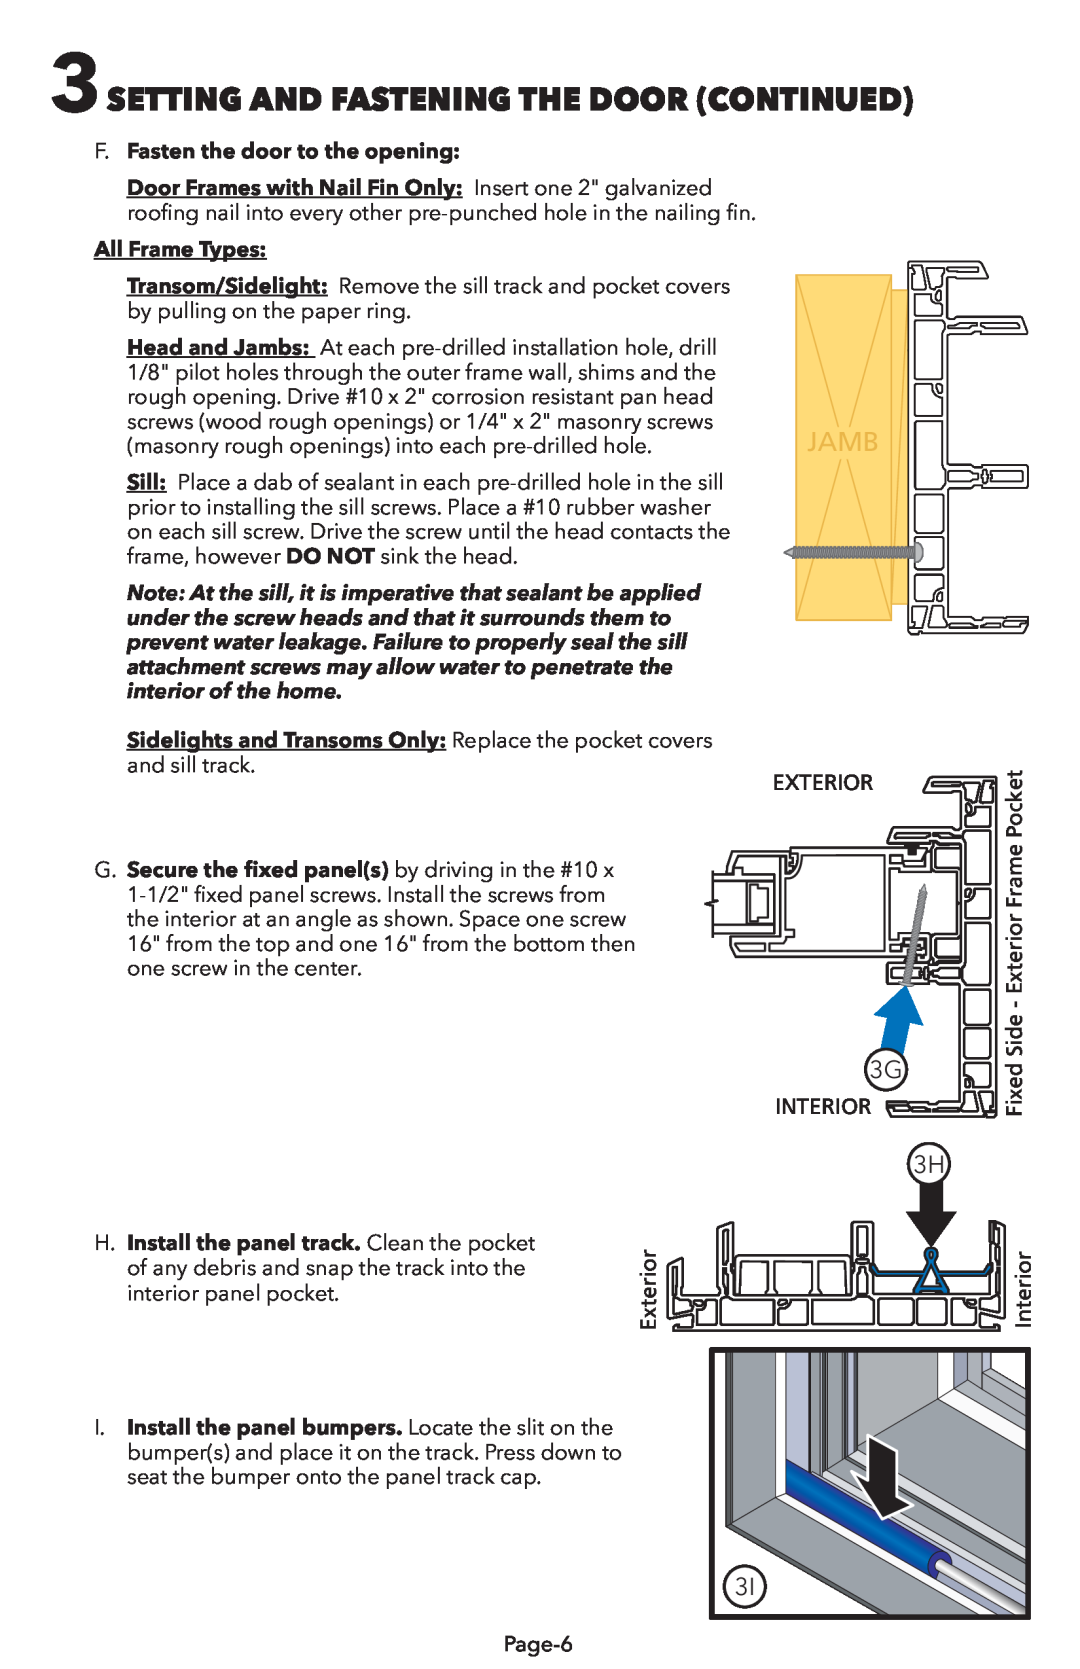 Pella V983492 installation instructions 3SETTING AND FASTENING THE DOOR CONTINUED, Jamb 